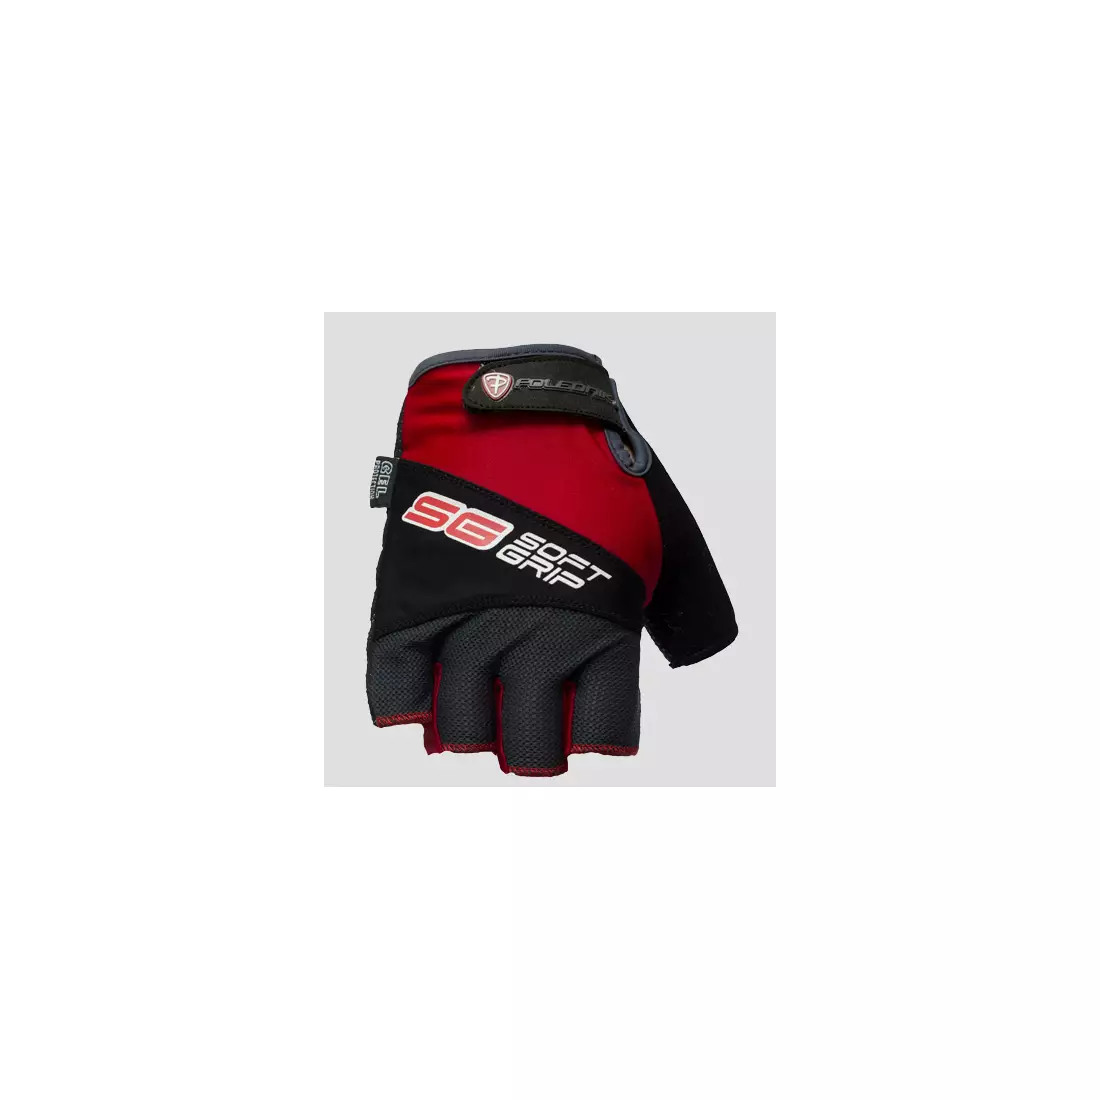 POLEDNIK SOFTGRIP NEW14 cycling gloves, color: Red